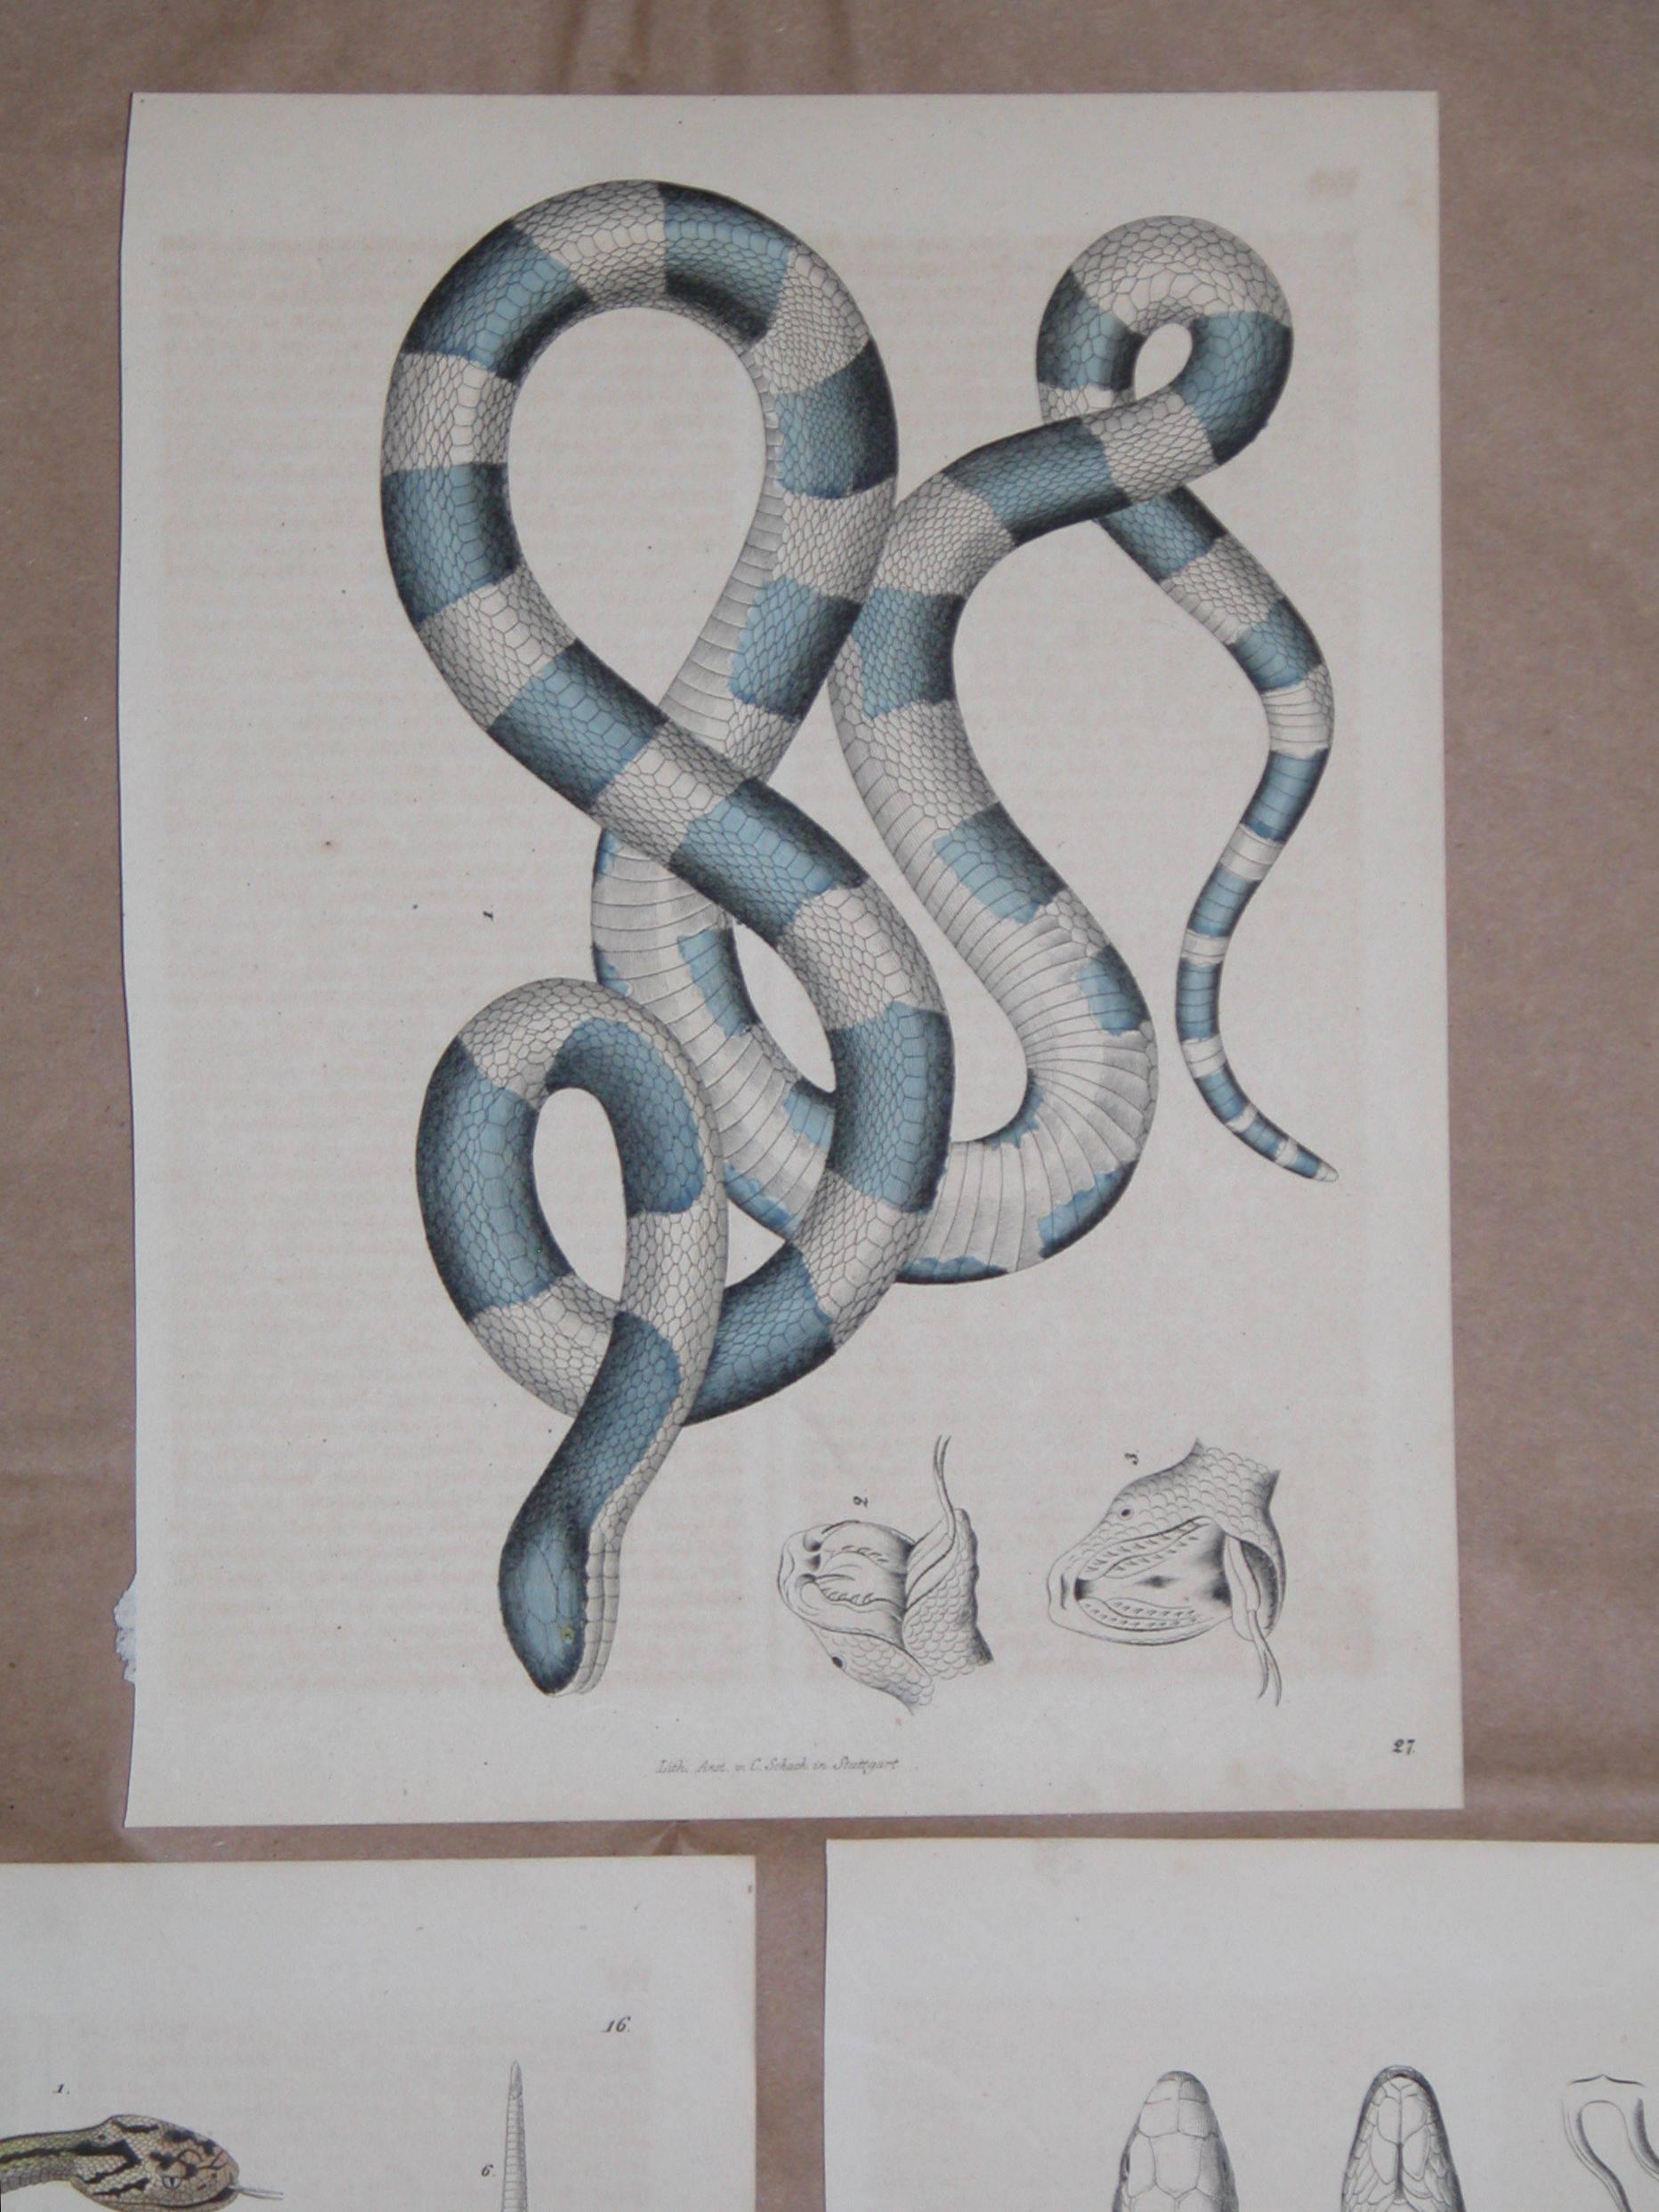 Set of three prints of snakes all mid-19th century in excellent condition, measures: 7 3/4 inches x 10 inches.